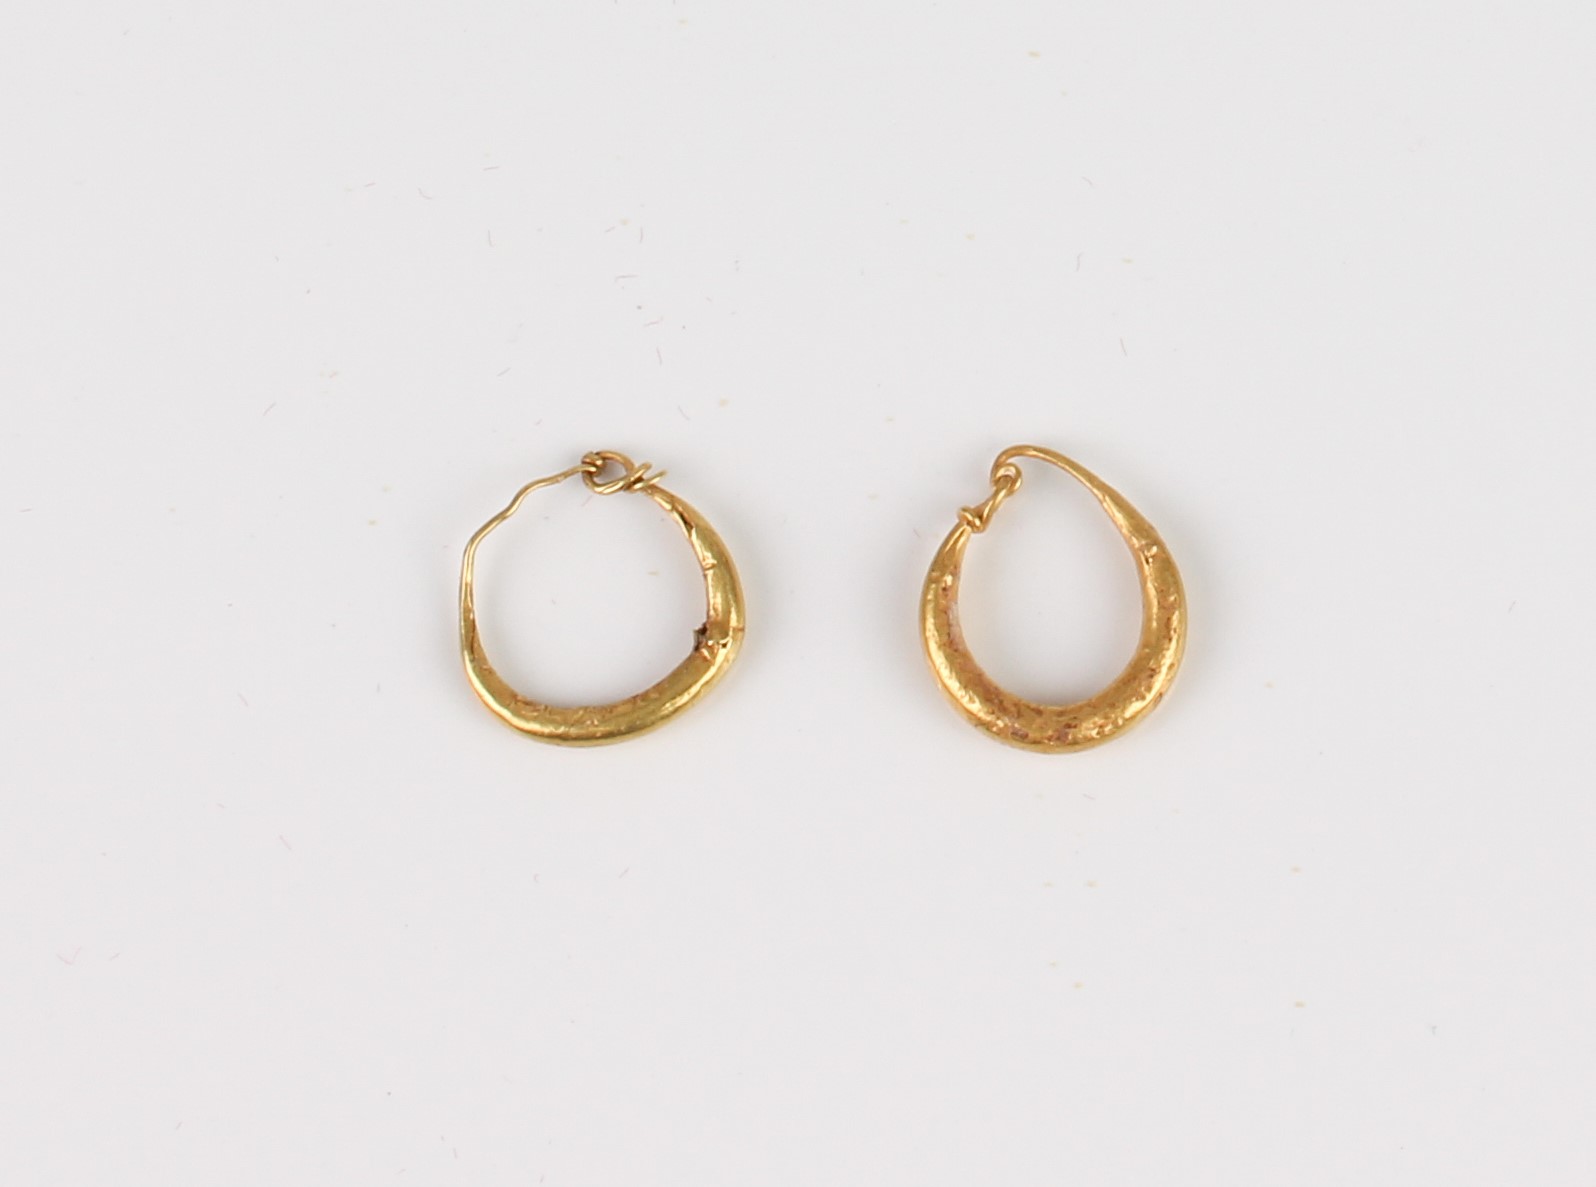 Antiquities, probably Roman Empire, 1st to 3rd century AD: two gold hoop earrings, with twisted wire - Image 2 of 3